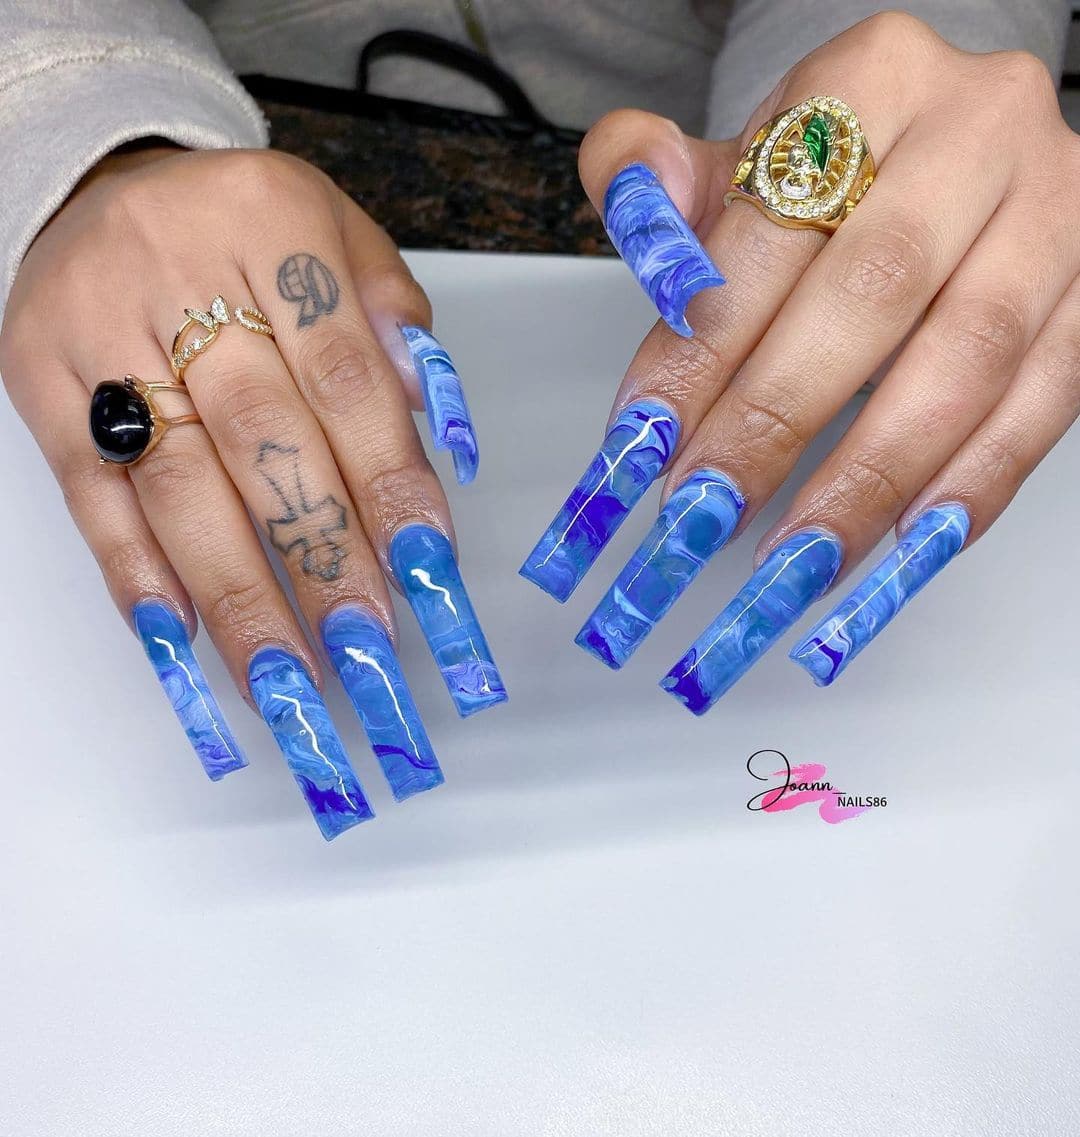 The Best Spring Nail Ideas 2022 to Inspire You